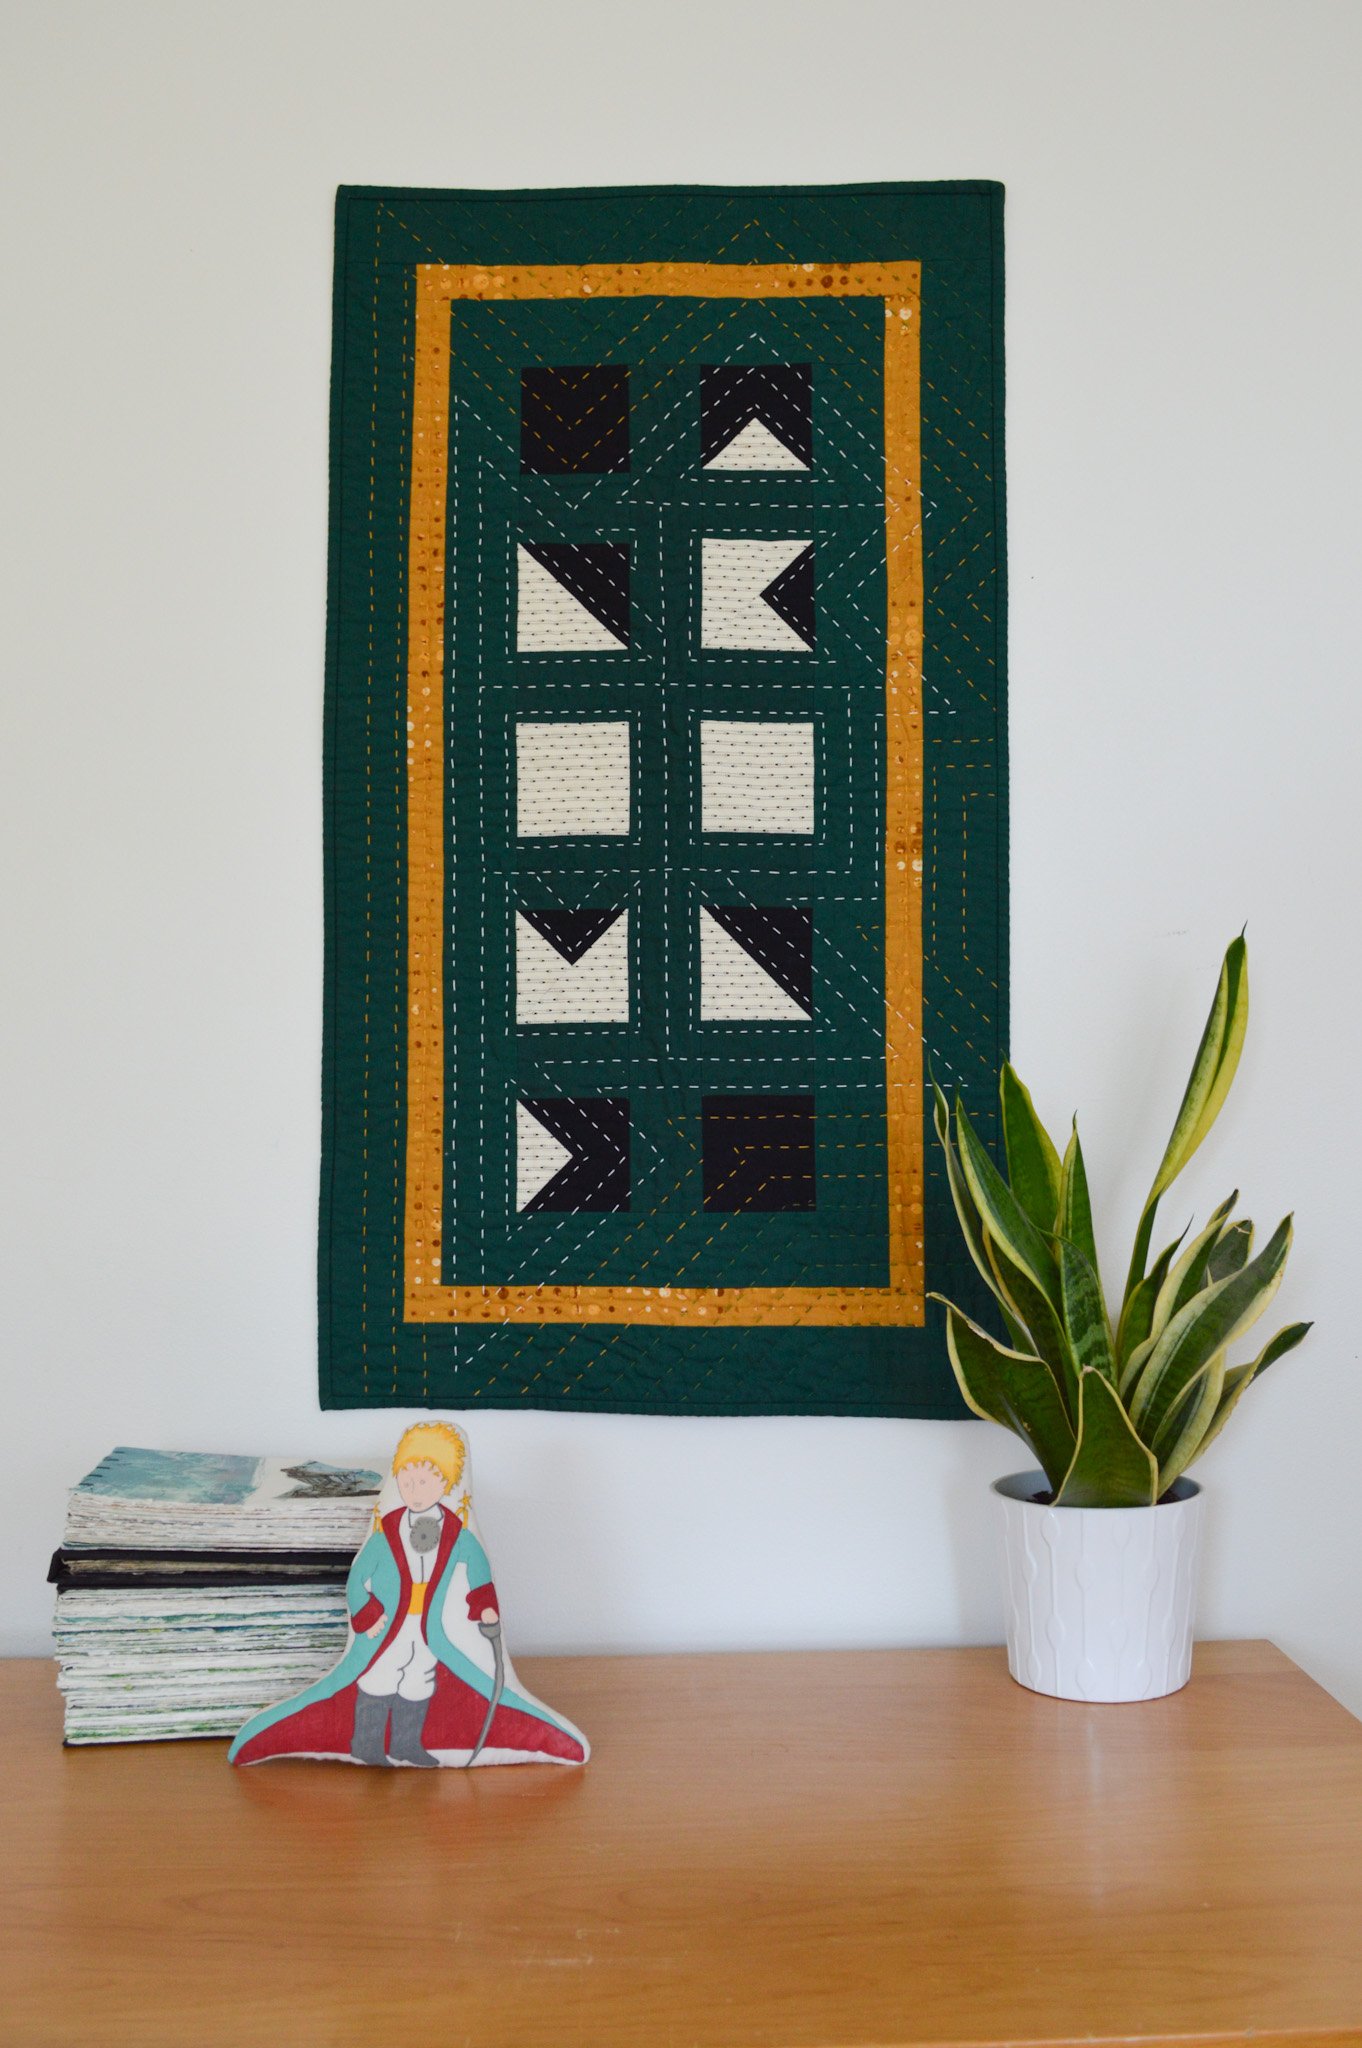  A green, quilted wall hanging with a snake plant, a stack of handmade books, and a Little Prince doll 